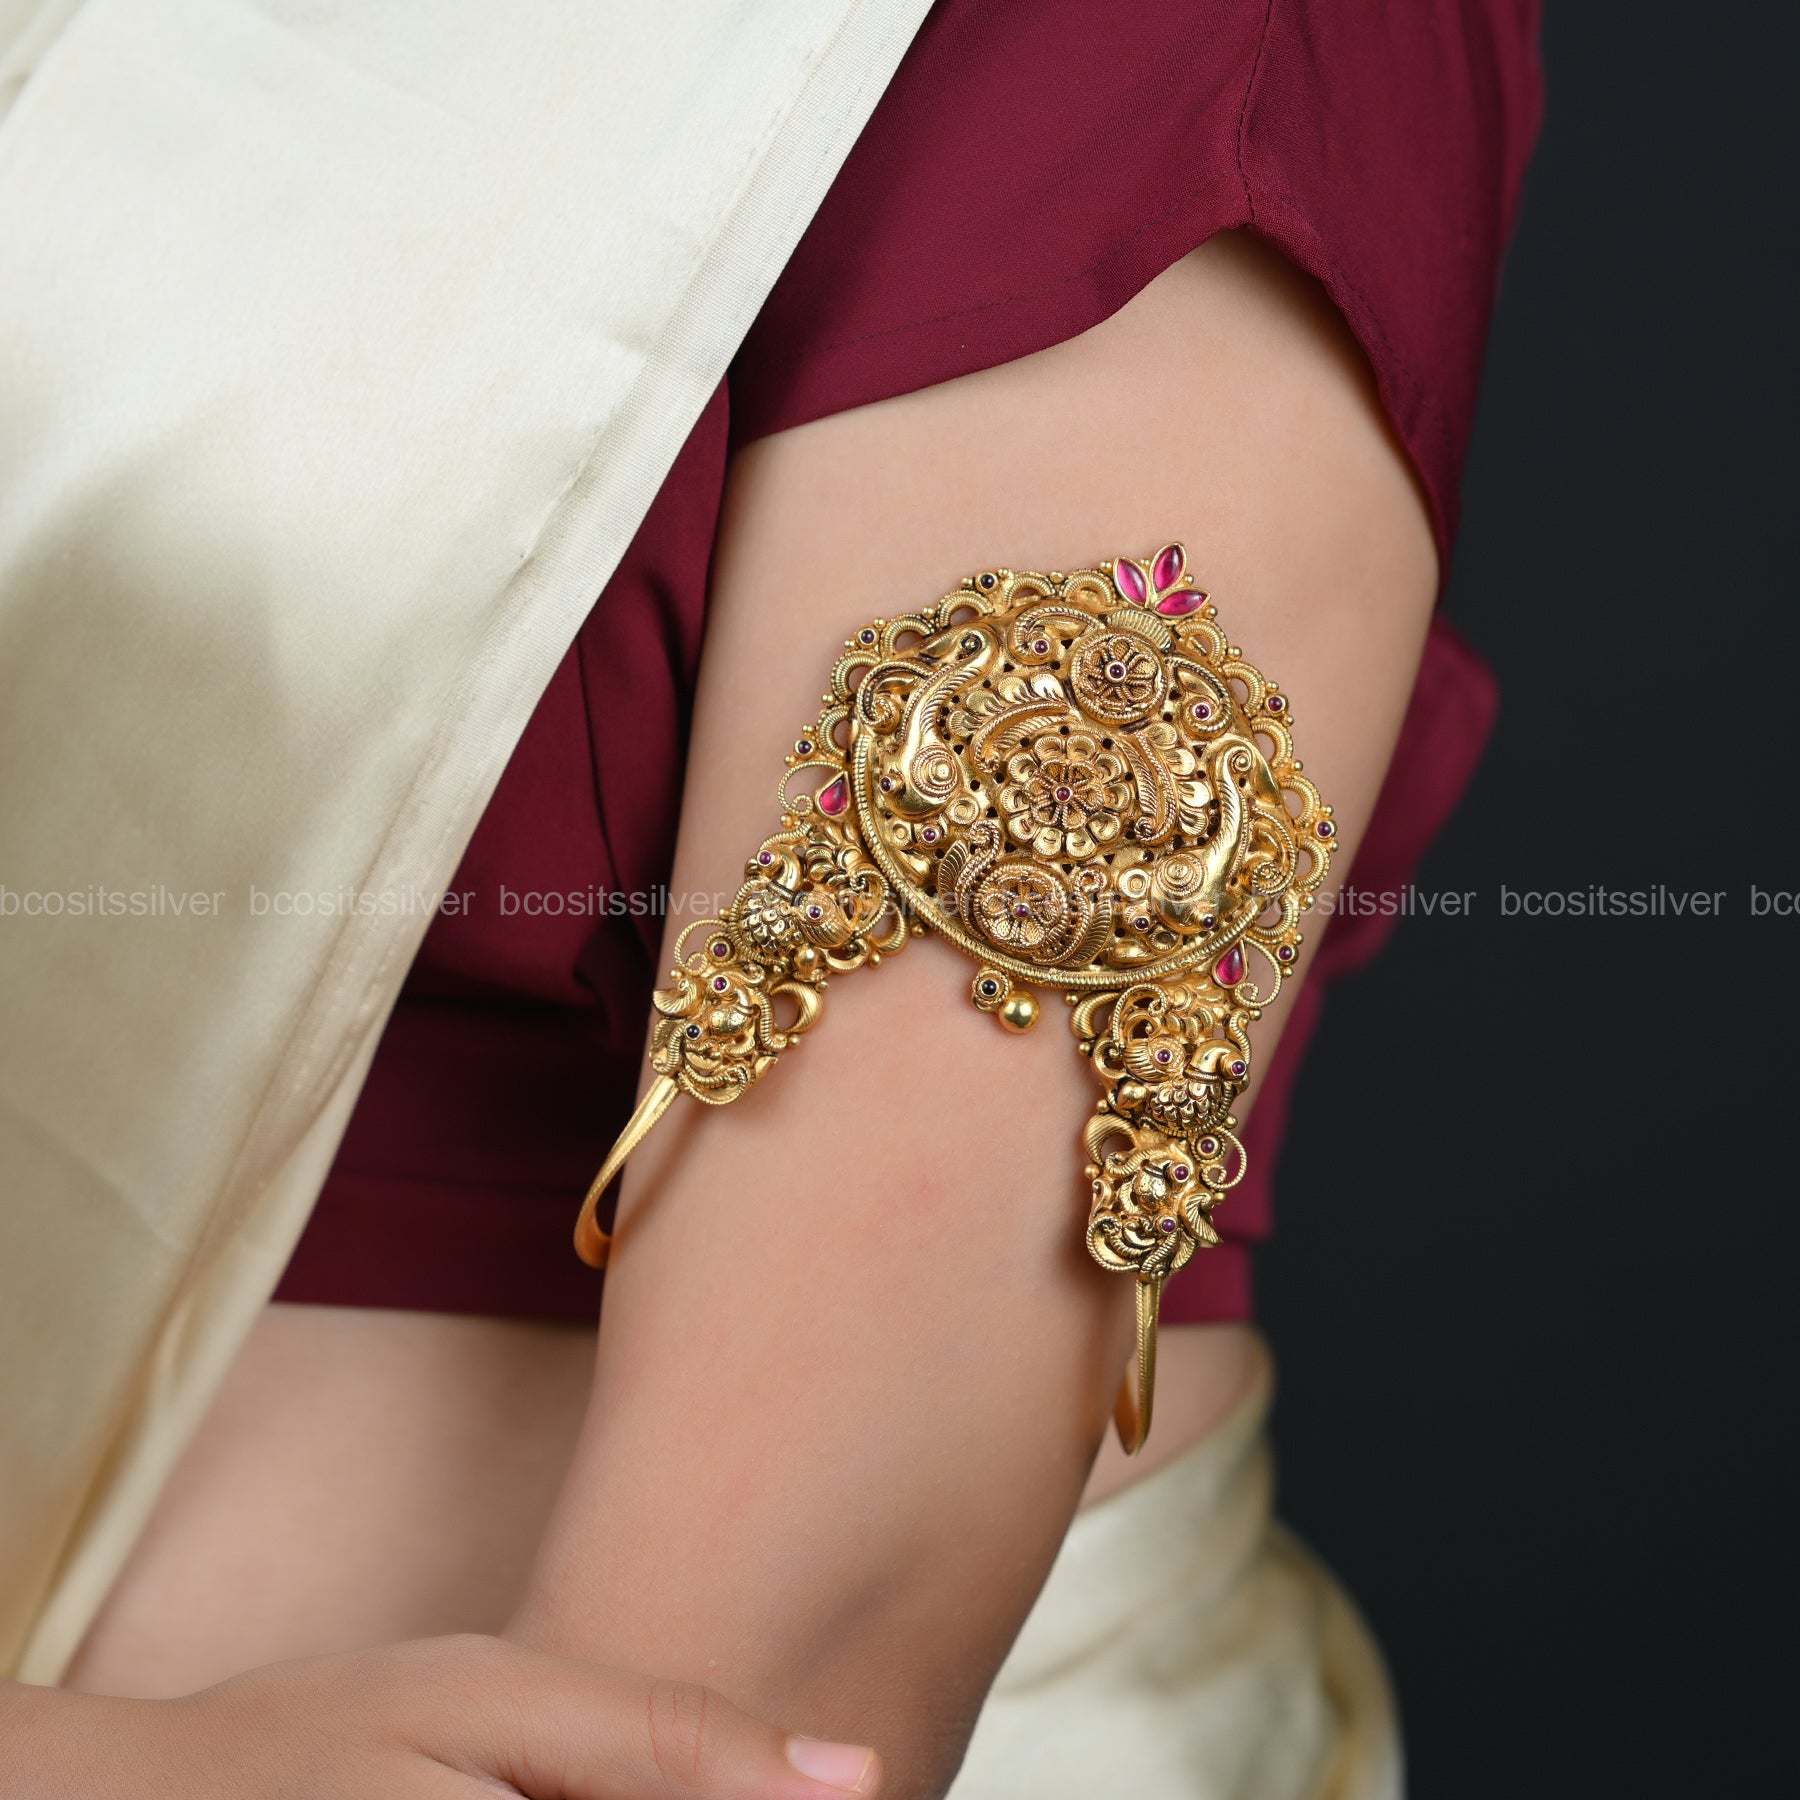 Gold Plated Arm Band - 6549